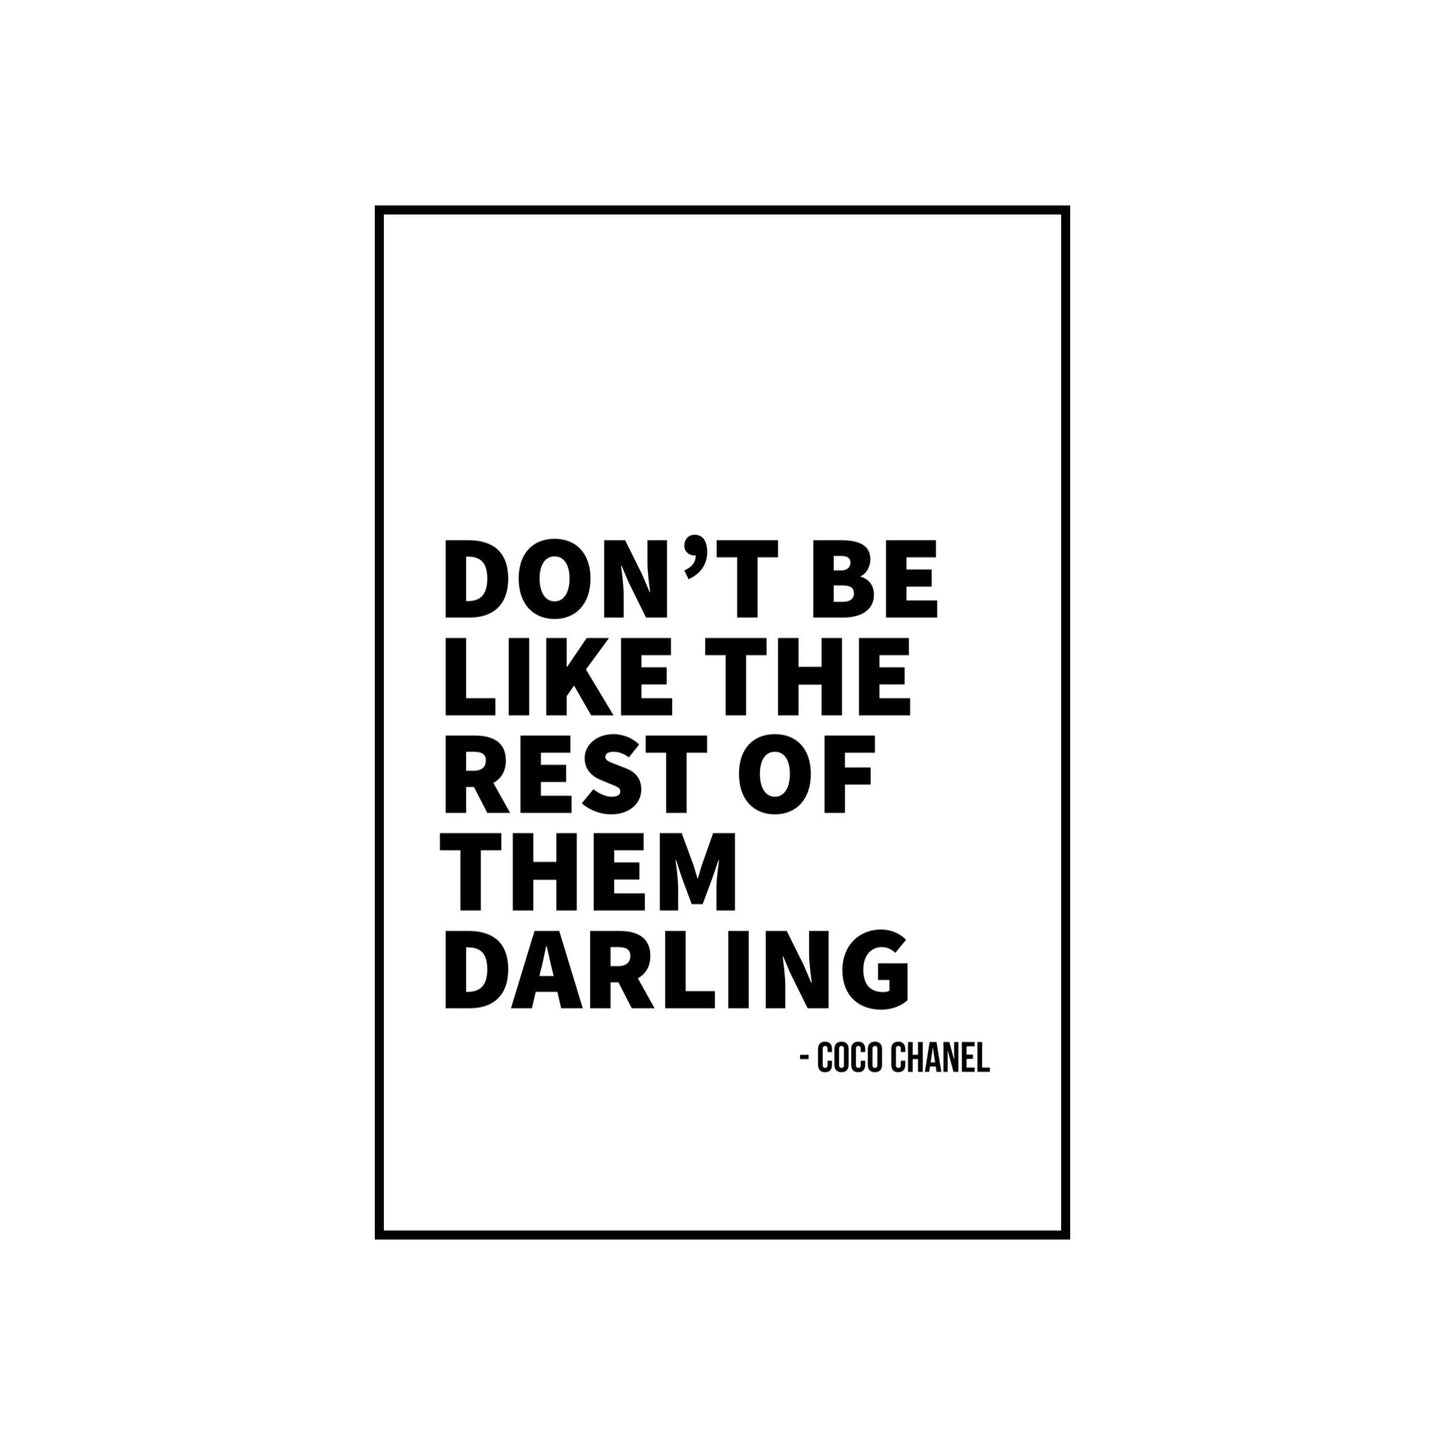 Don't be like the rest of them darling - THE WALL STYLIST